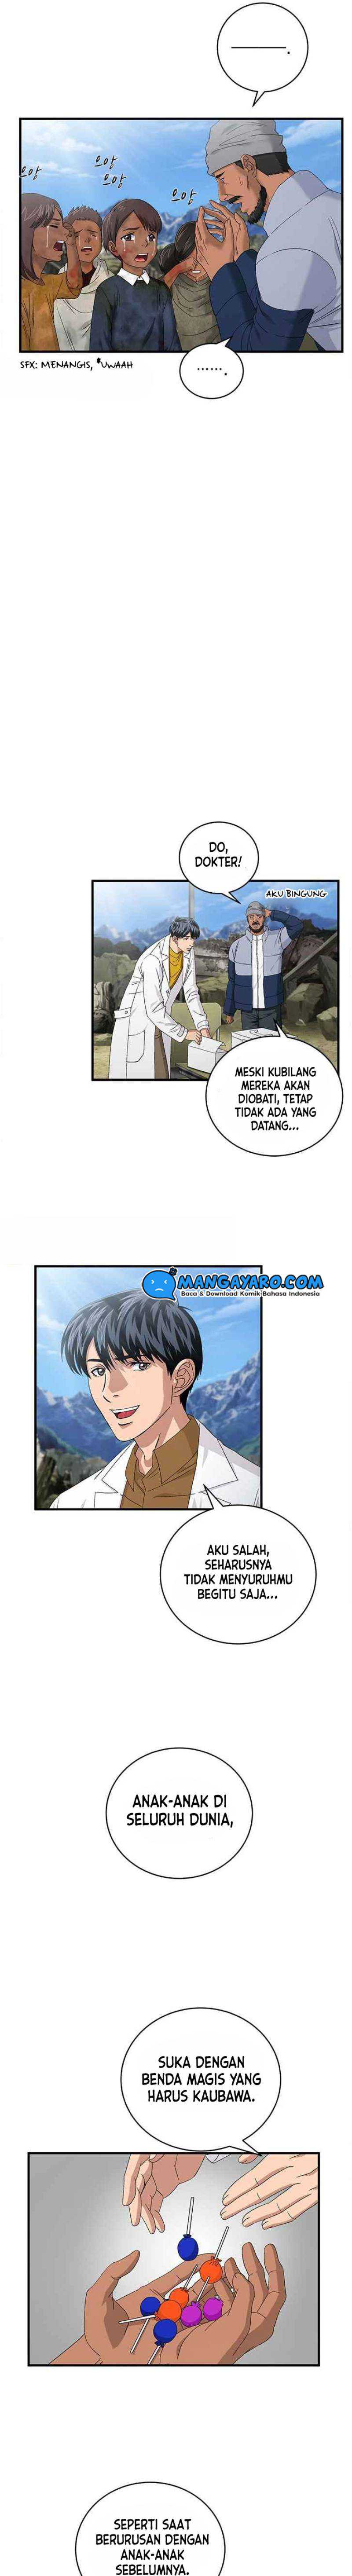 Dr. Choi Tae-Soo Chapter 61